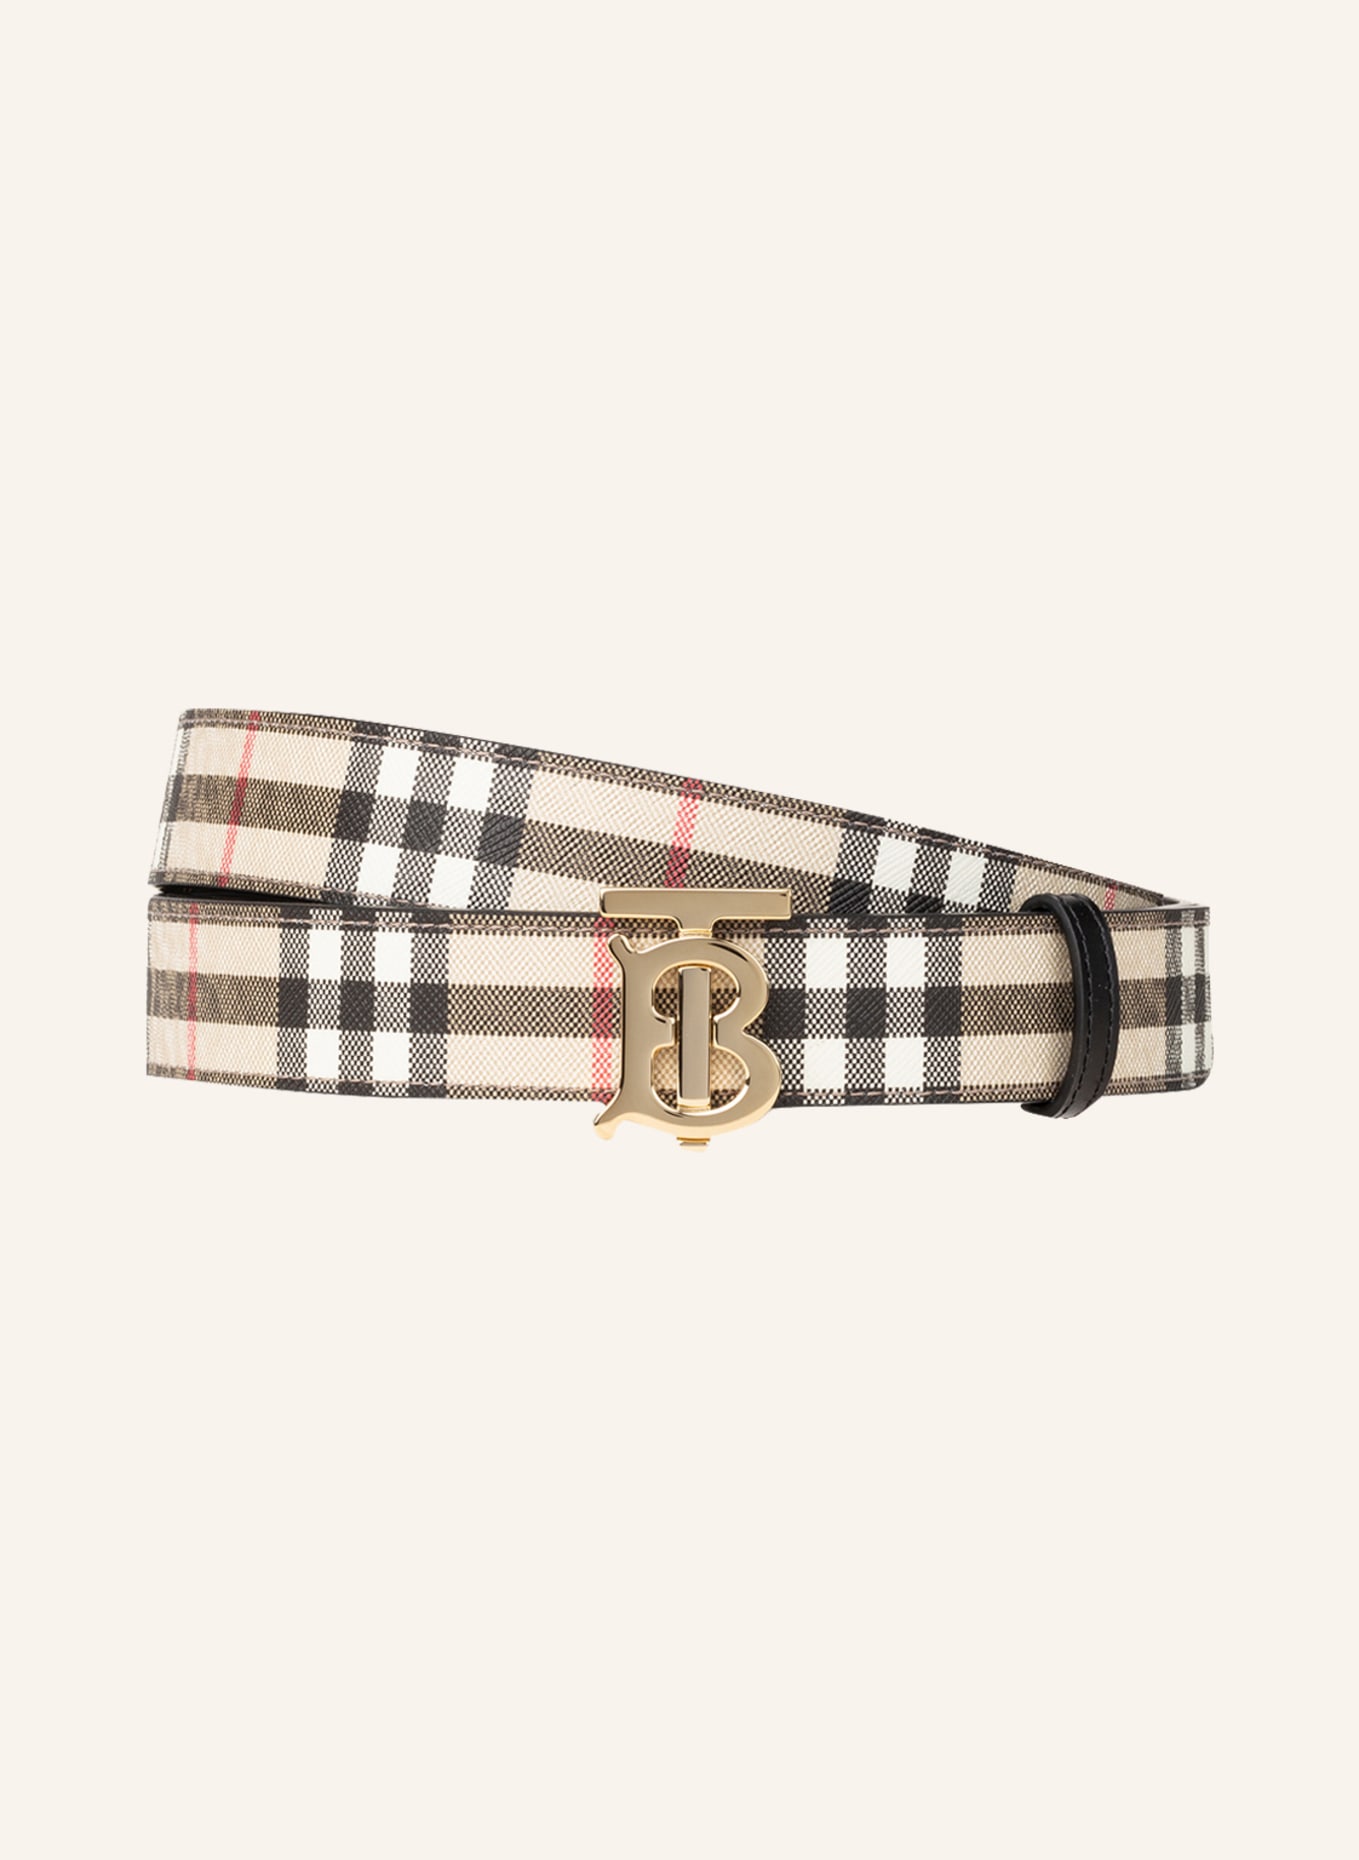 Burberry, Accessories, 0 Authentic Burberry Belt